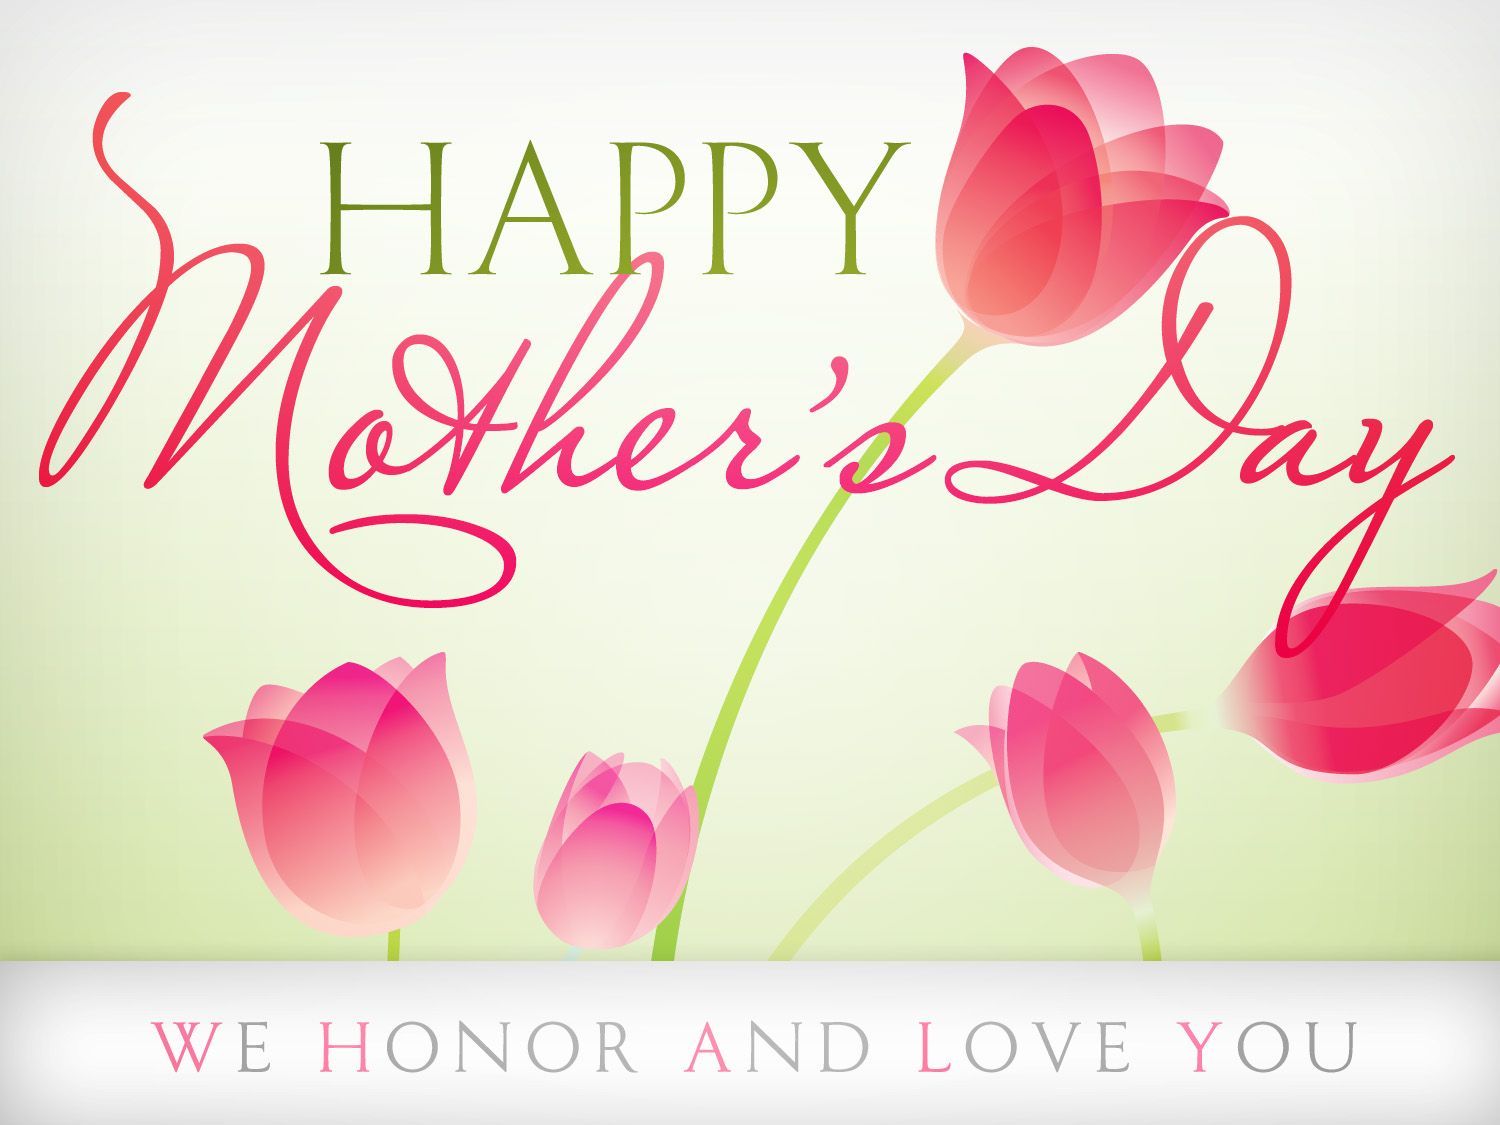 Wishing all the Moms a very blessed Happy Mother's Day. Sending my